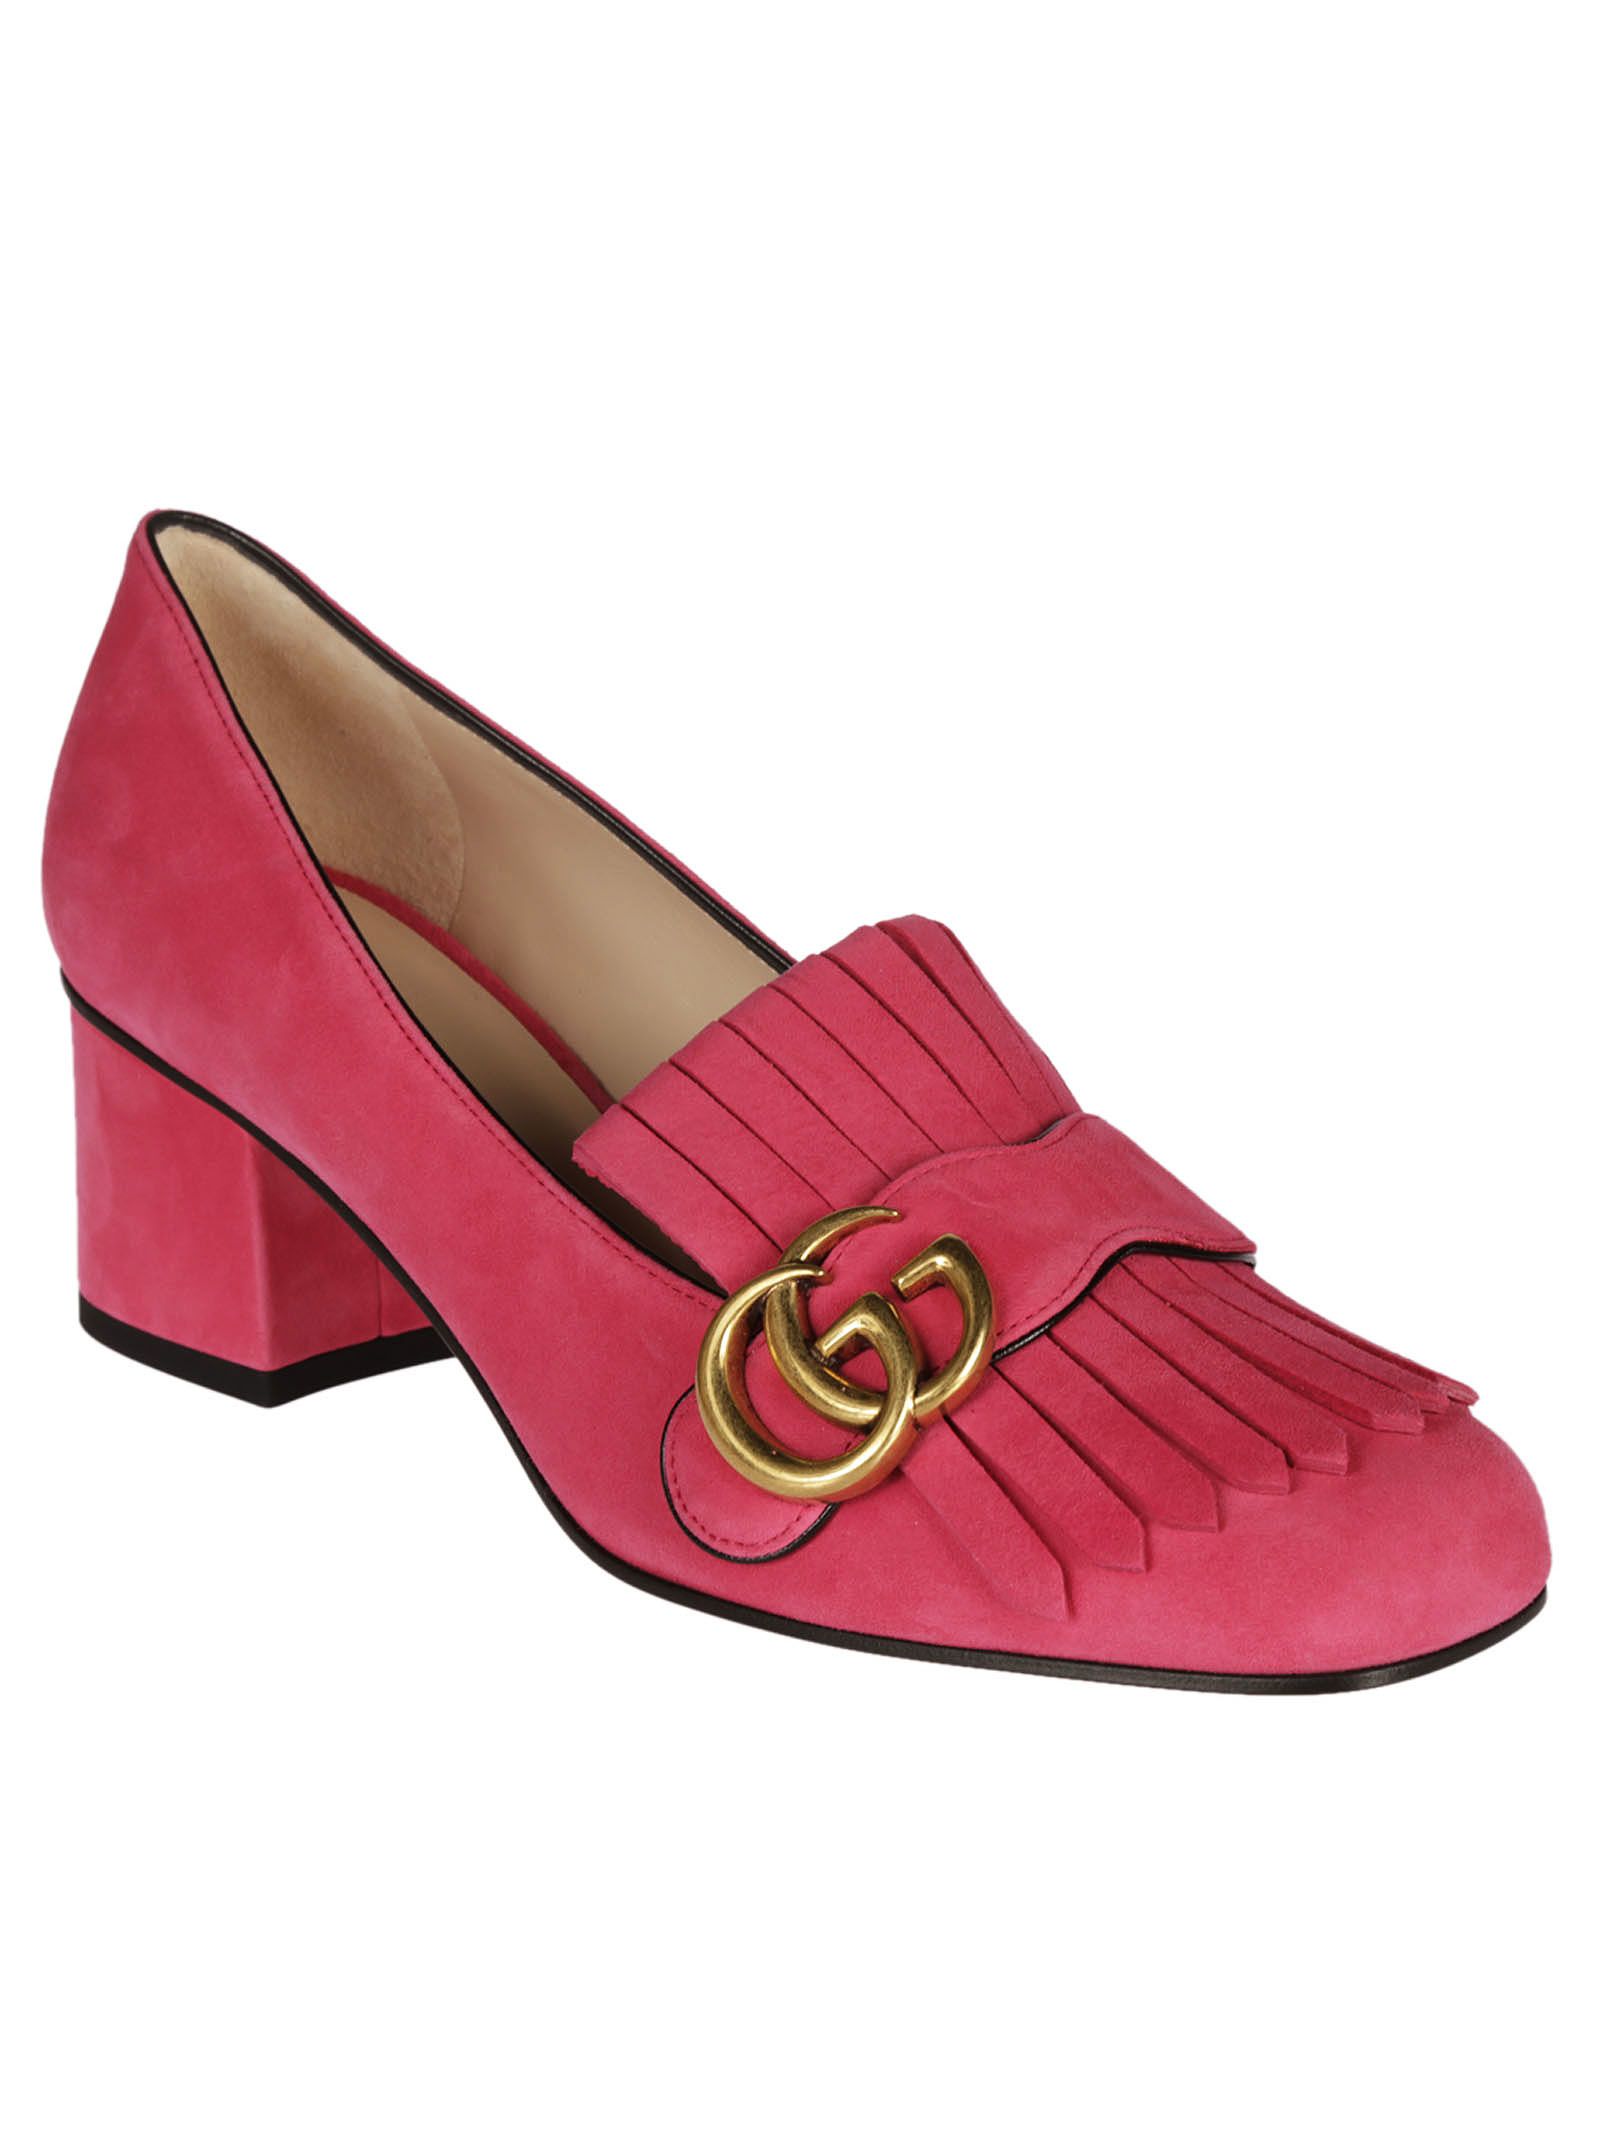 italist | Best price in the market for Gucci Gucci Marmont Pumps - Hot ...